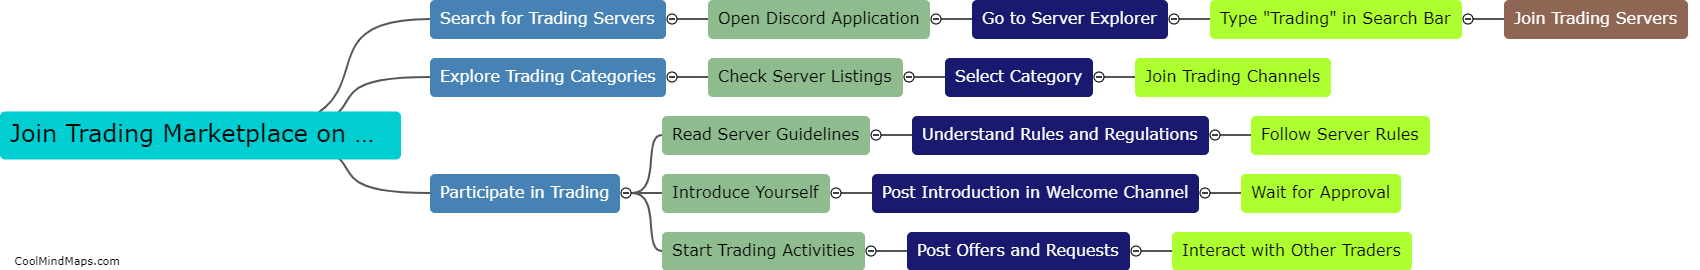 How can I join a trading marketplace on Discord?